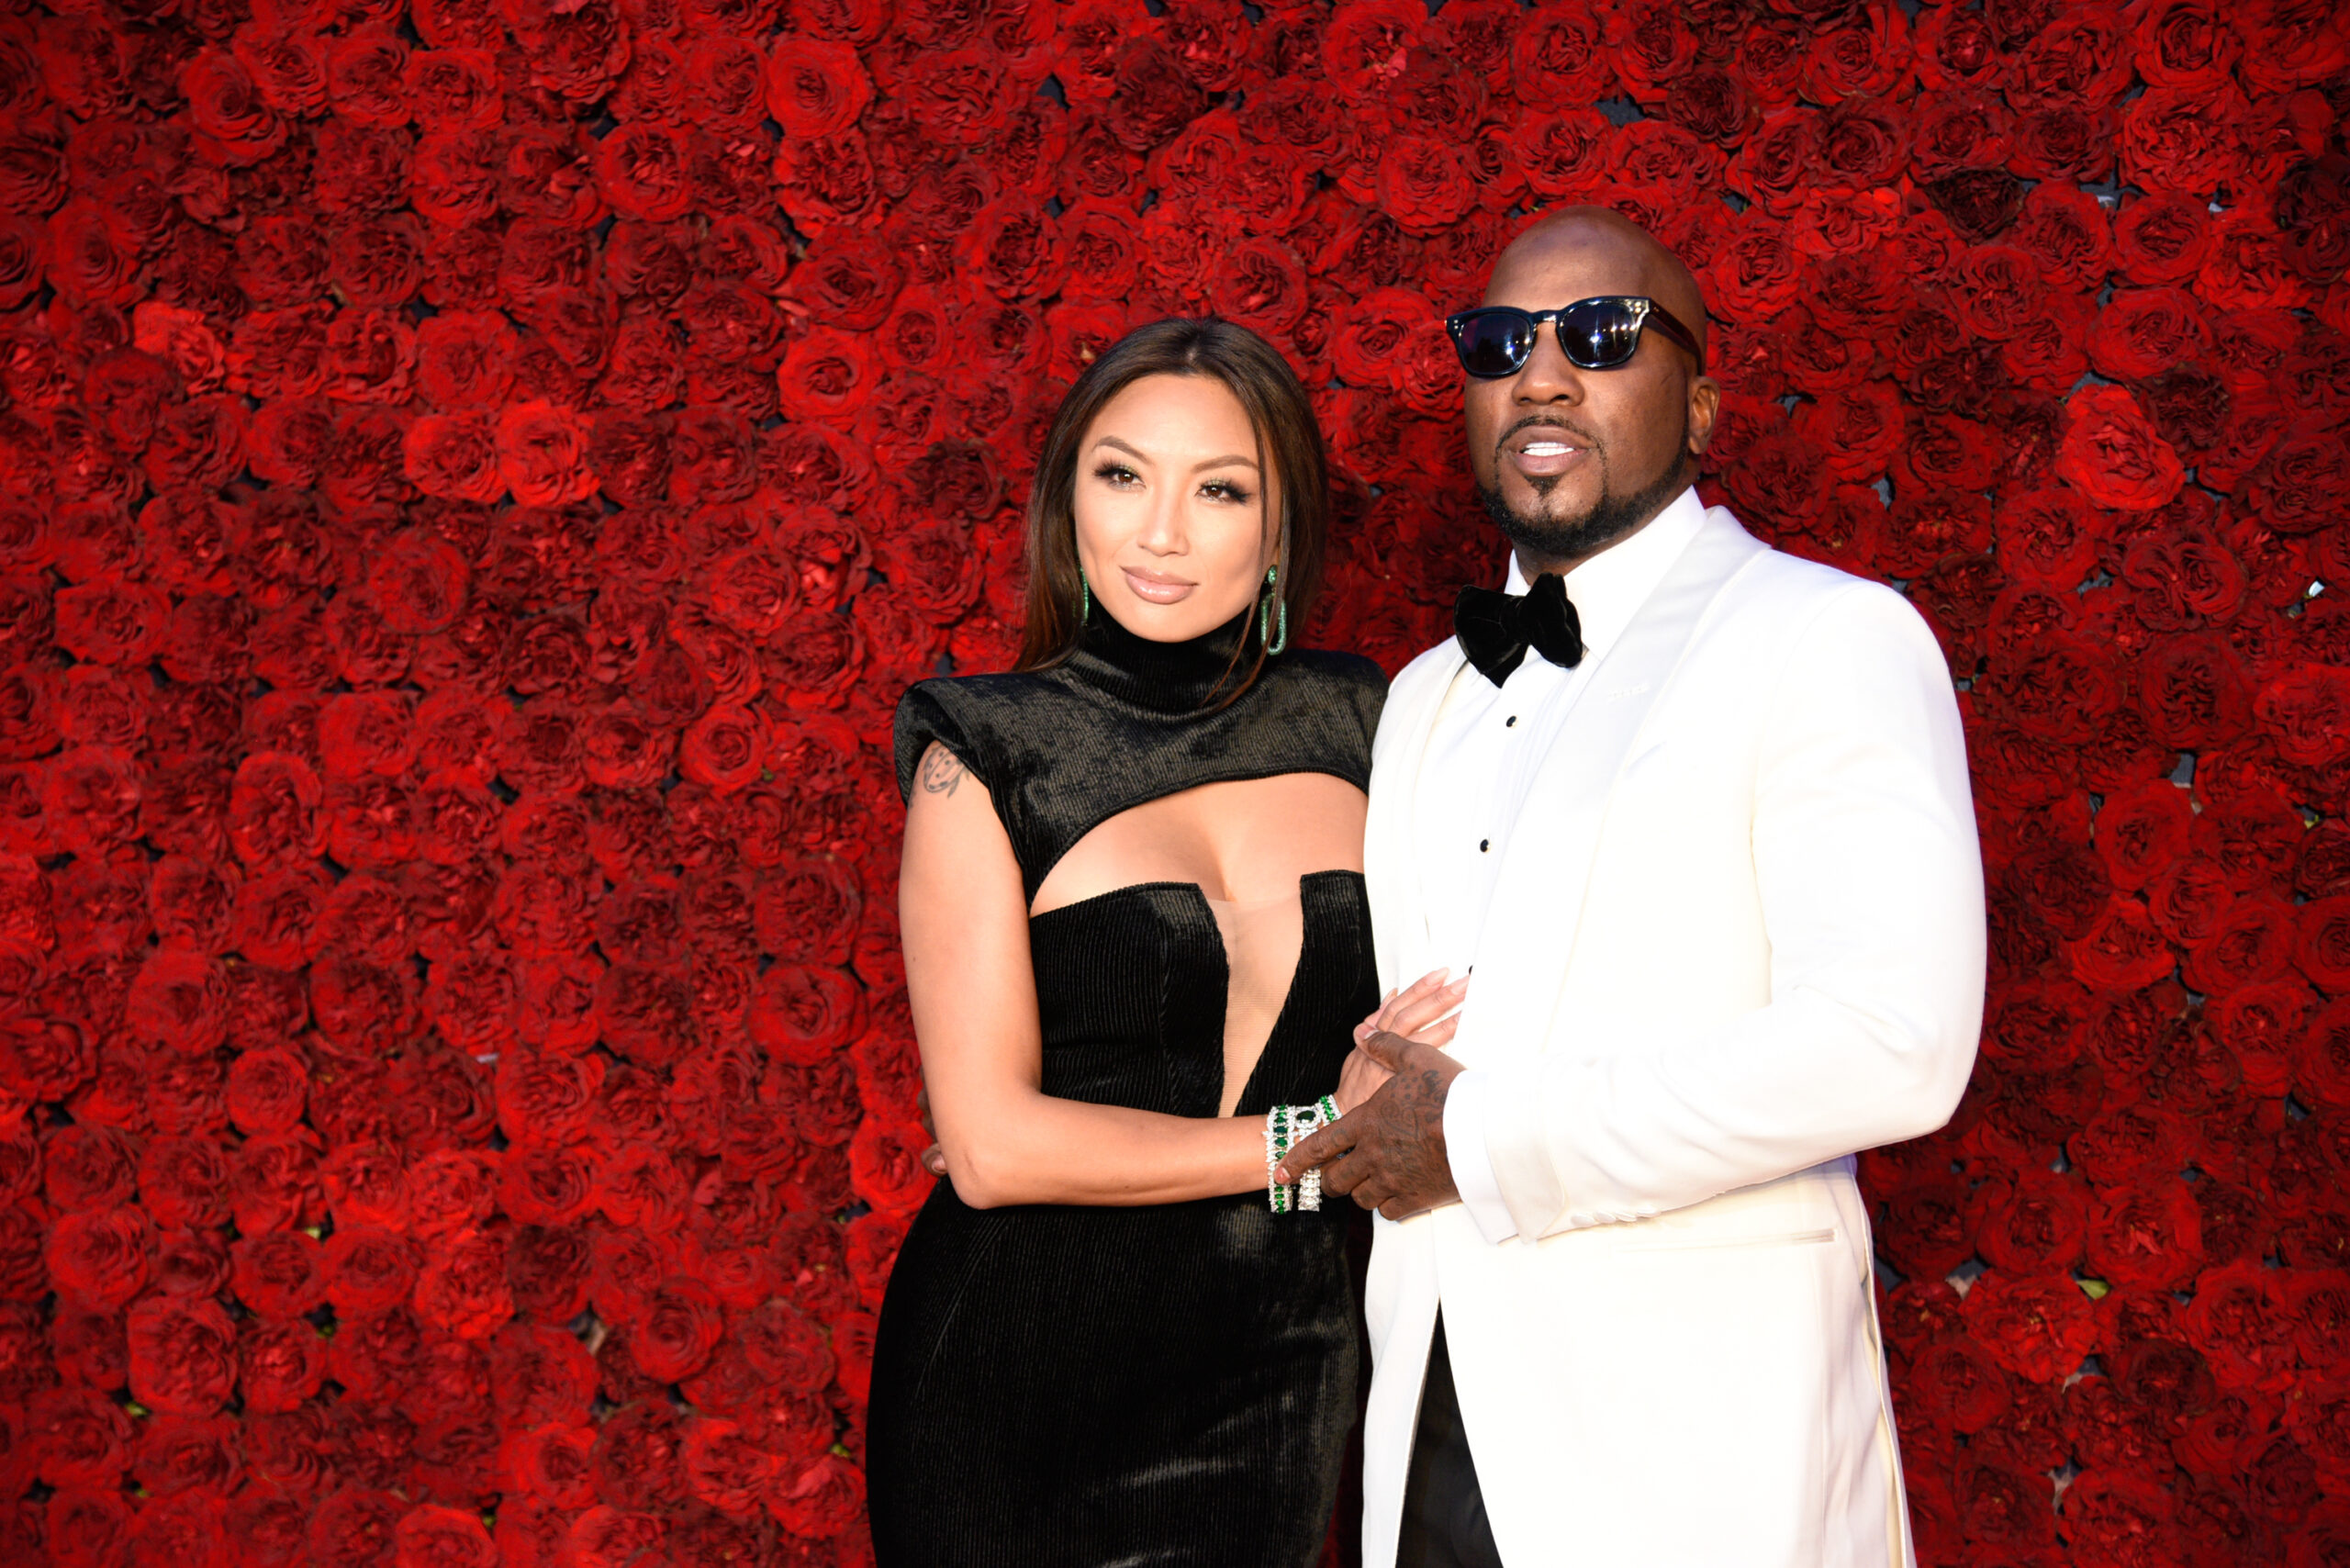 Jeezy & Jeannie Mai Divorce Due To Disagreements On “Family Values & Expectations”: Report